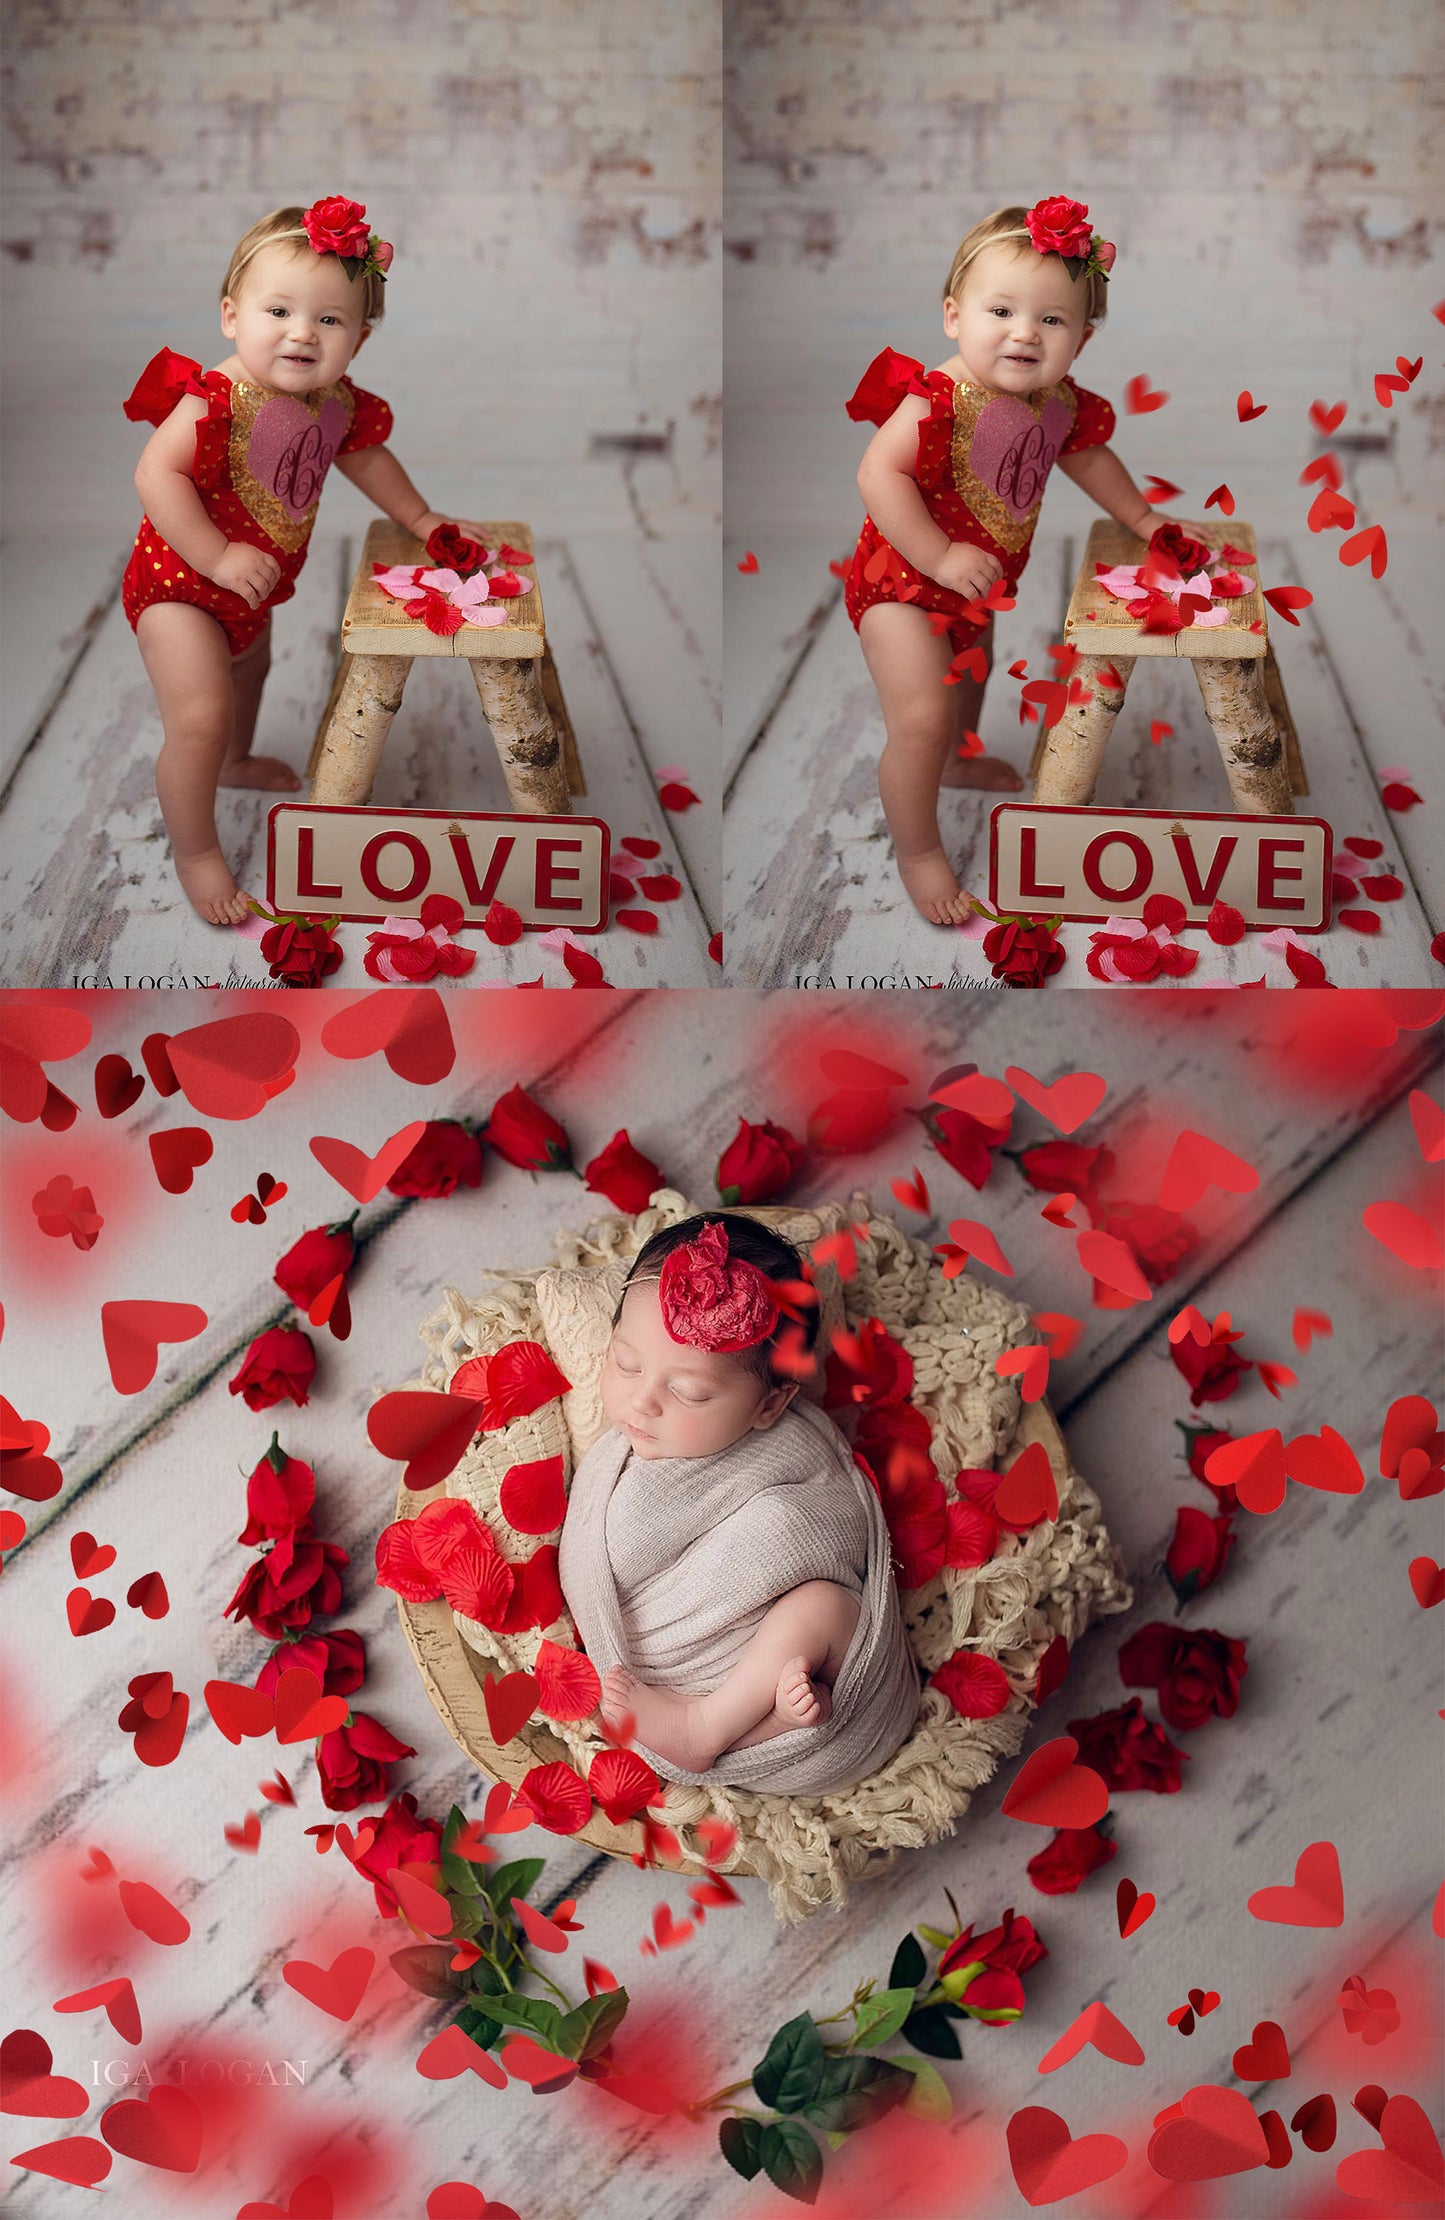 50 Red Paper Hearts Photo Overlays